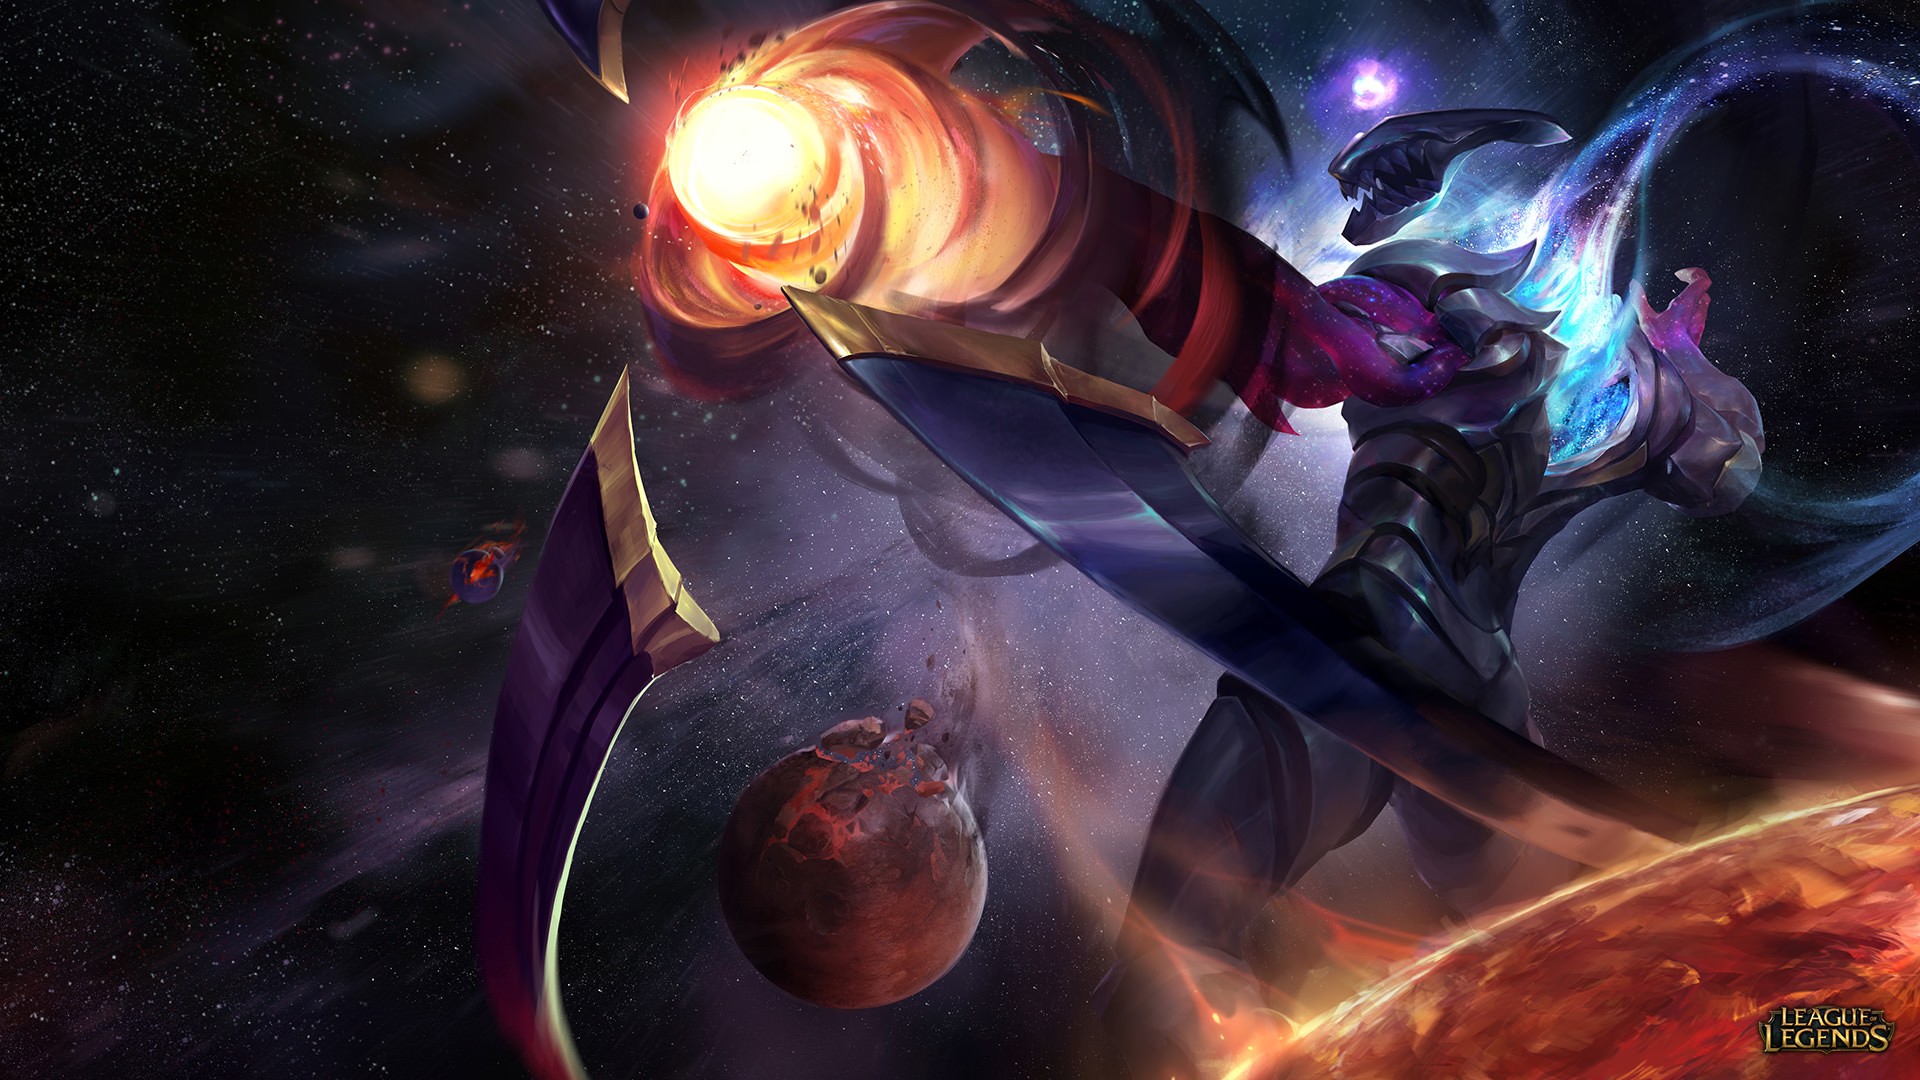 General 1920x1080 League of Legends PC gaming fantasy art Varus (League of Legends) video game characters